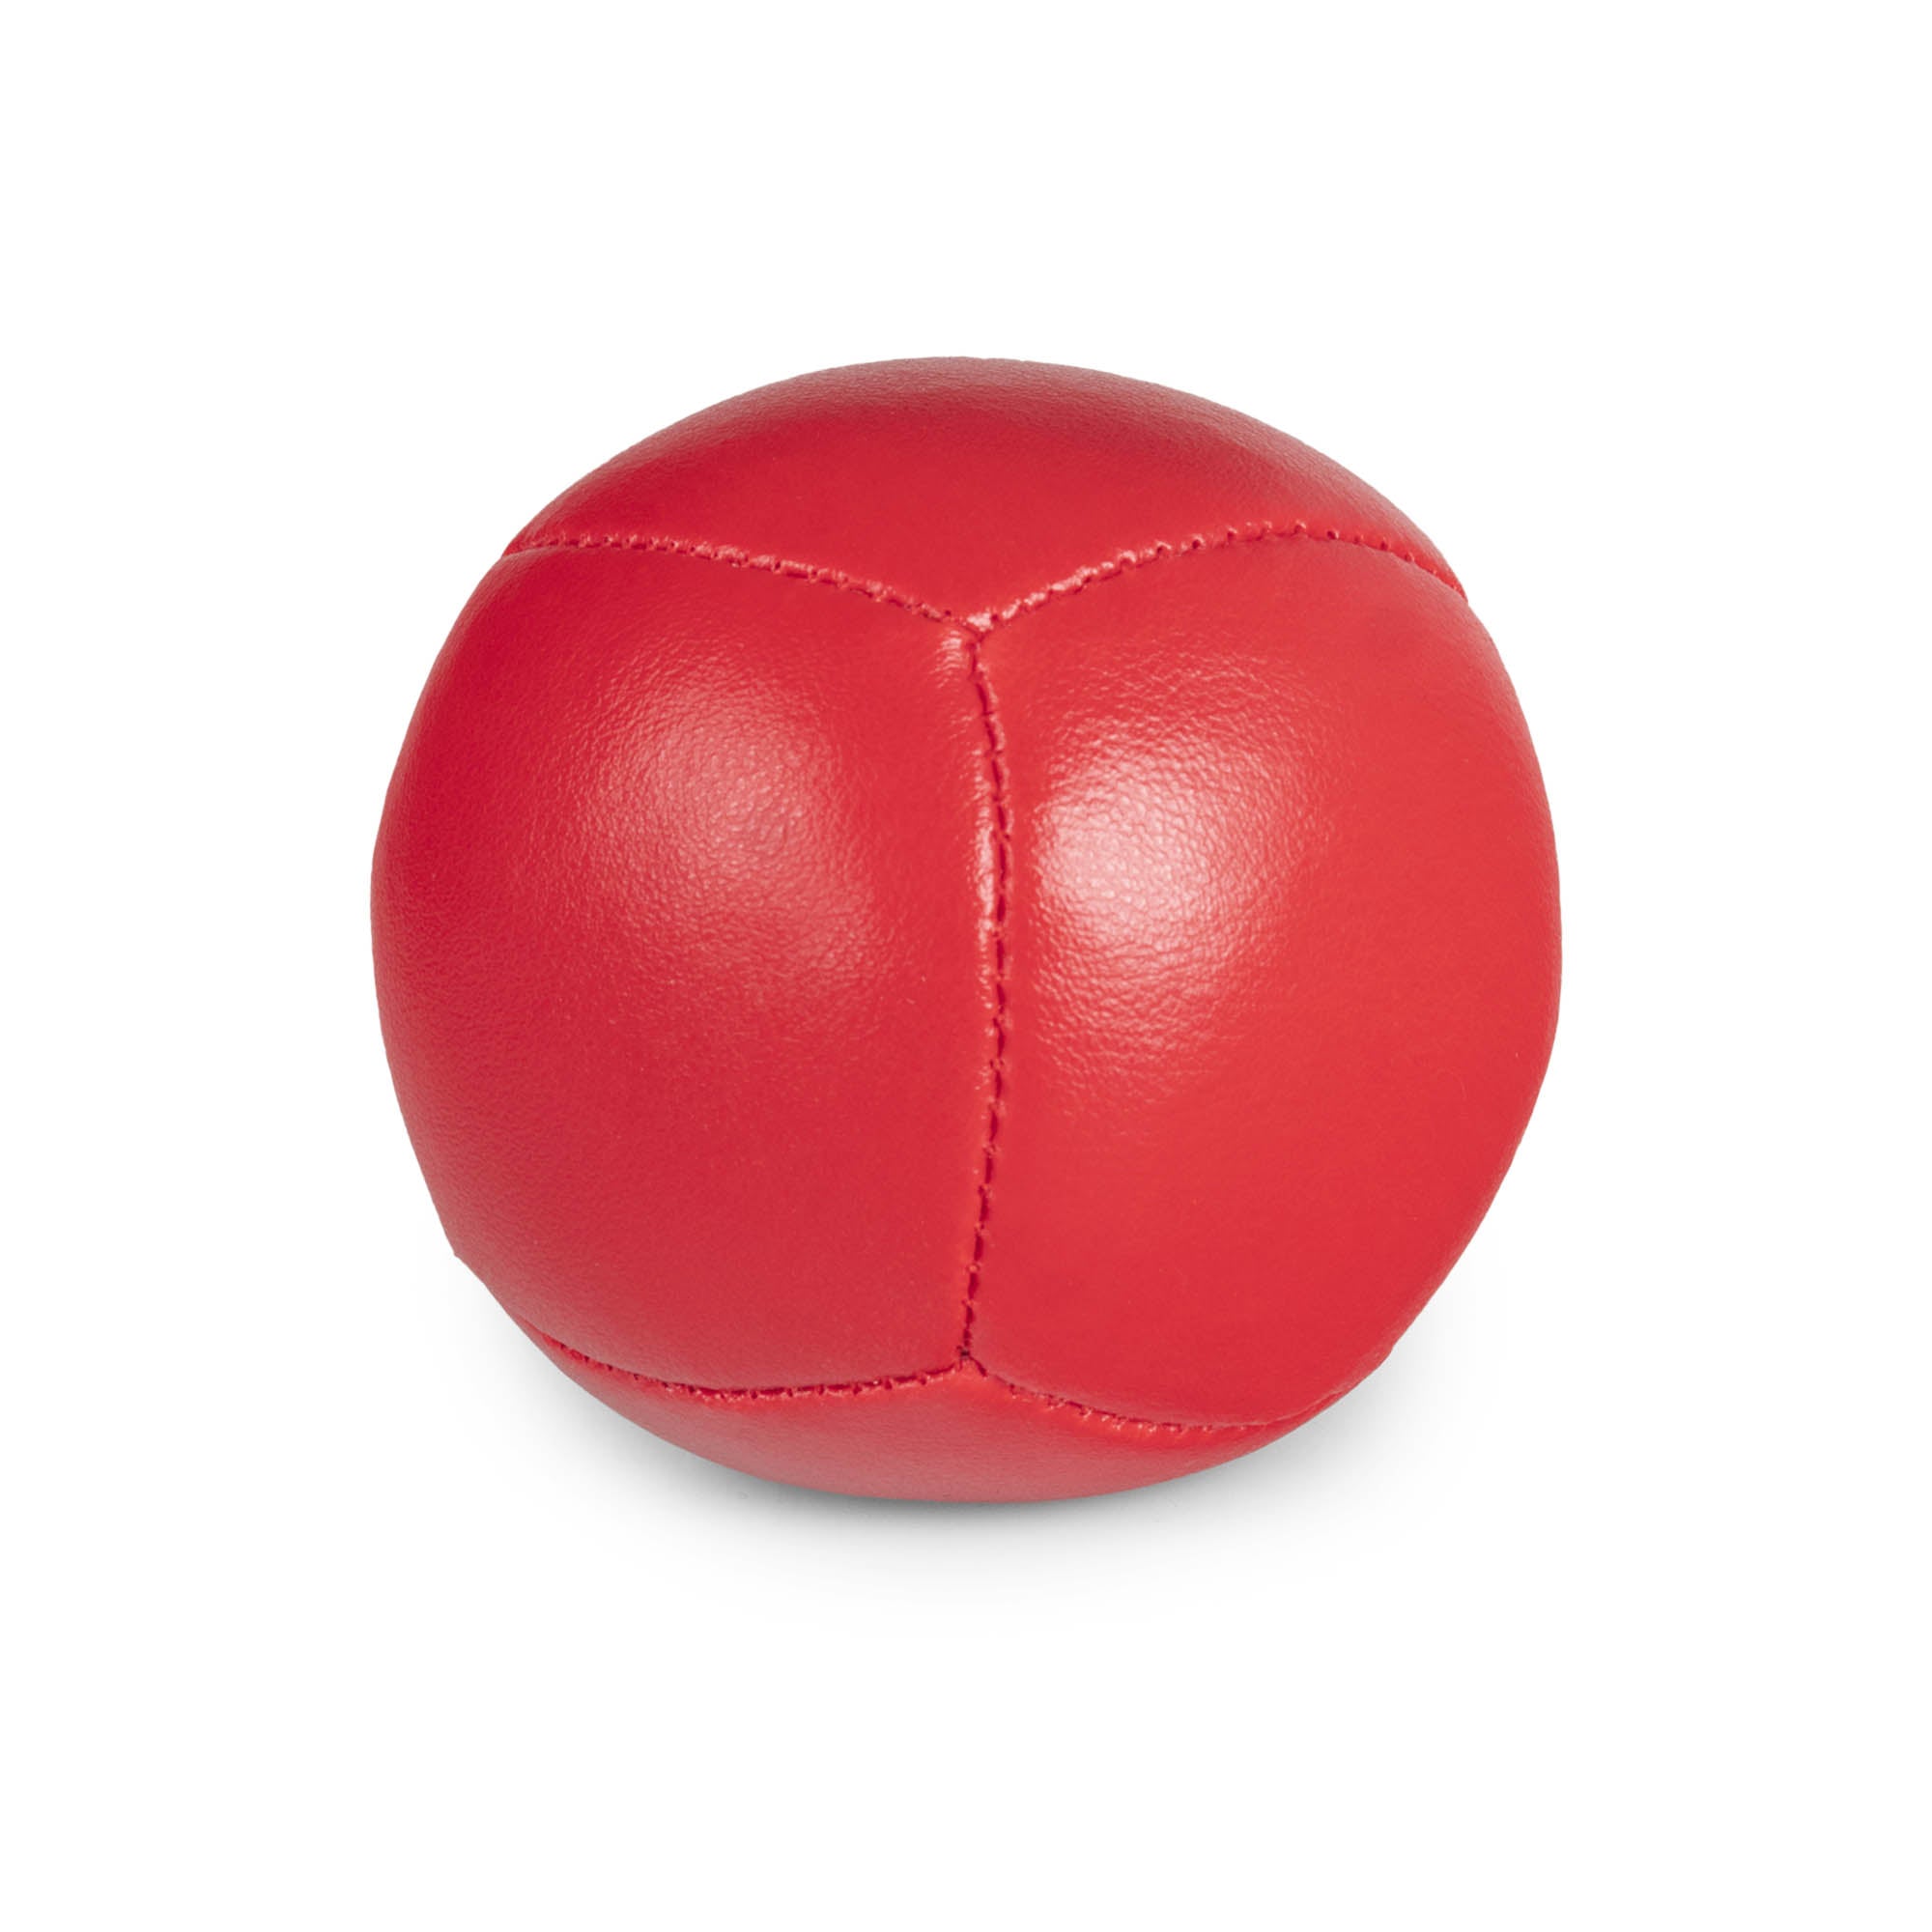 Firetoys red 110g thud juggling ball, straight on in a white background